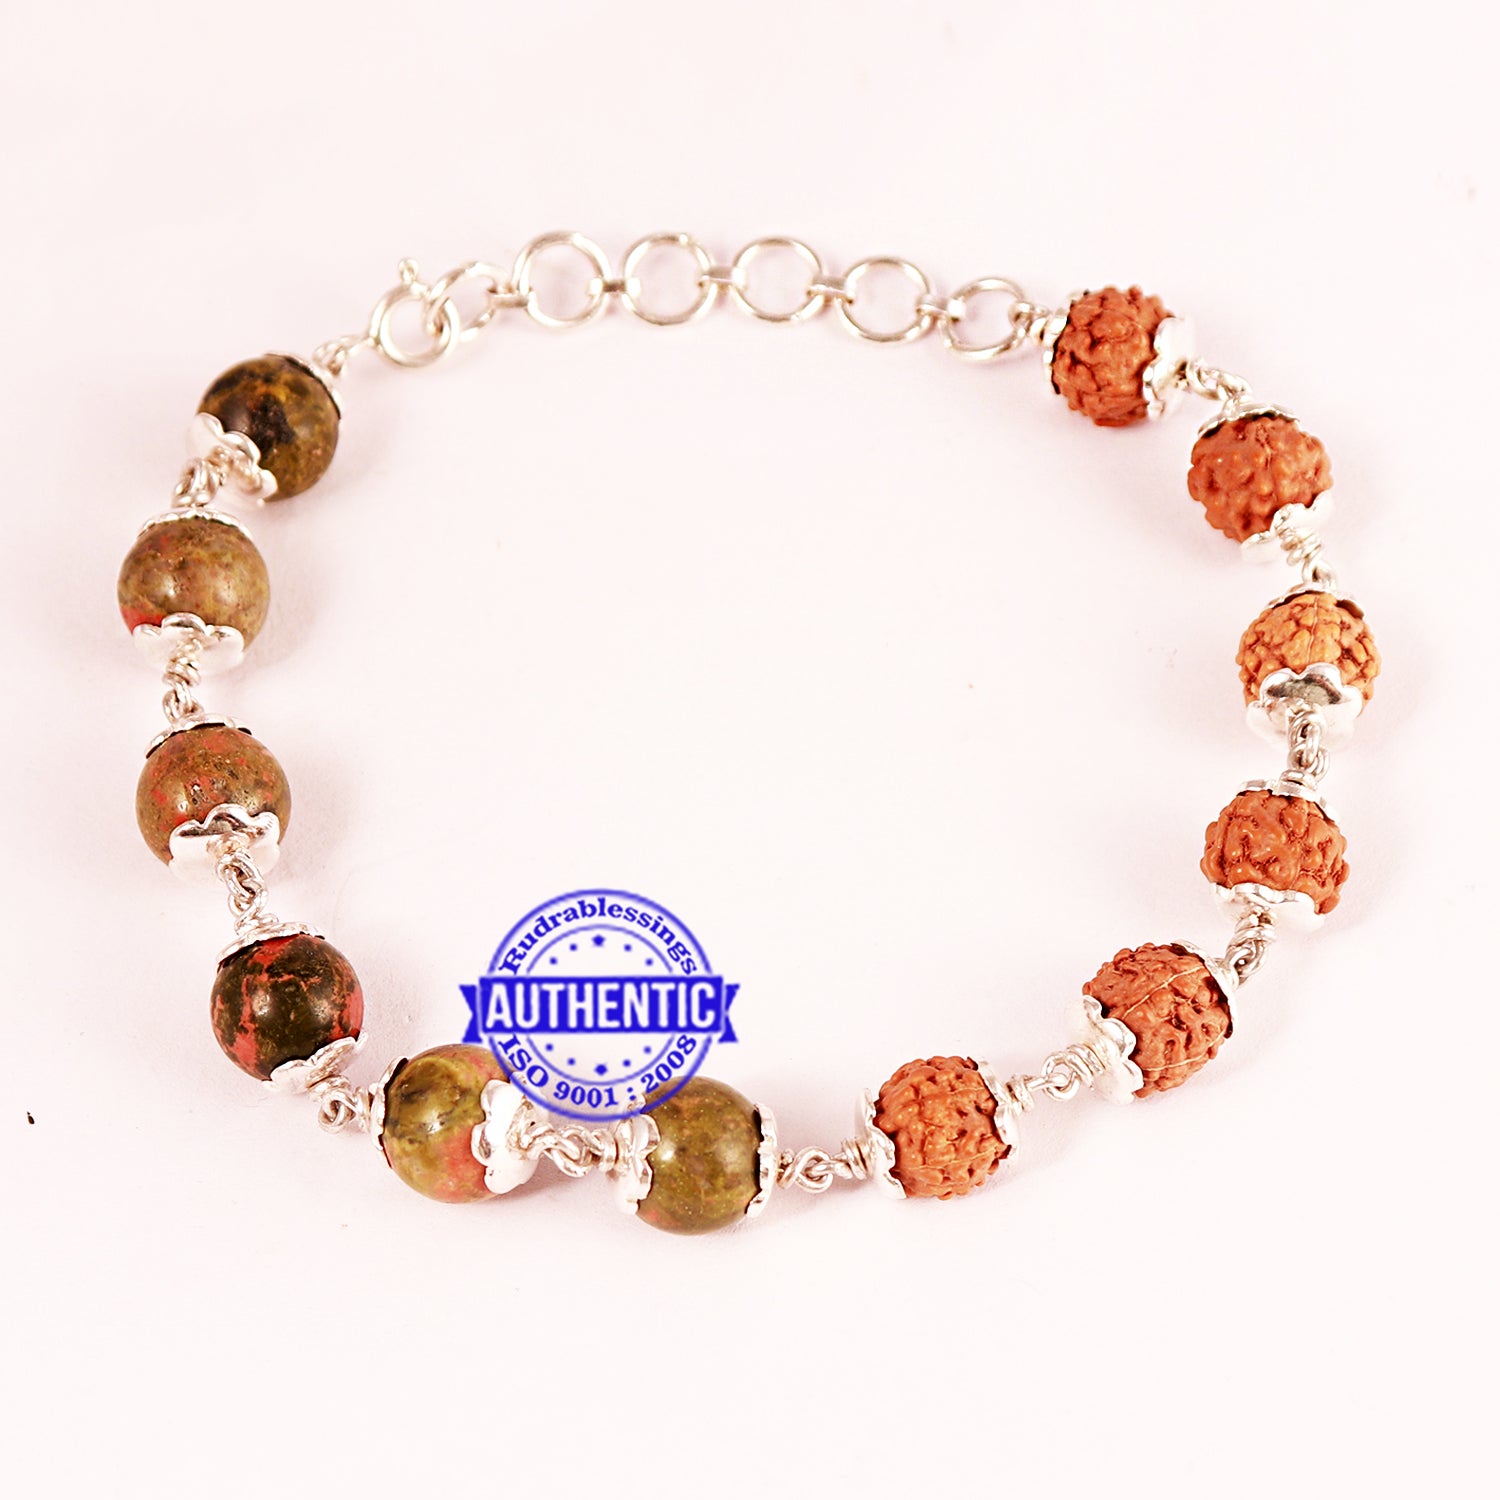 2 Mukhi Rudraksha Bracelet to brings inner bliss and promotes unity and  harmony - Engineered to Heal²